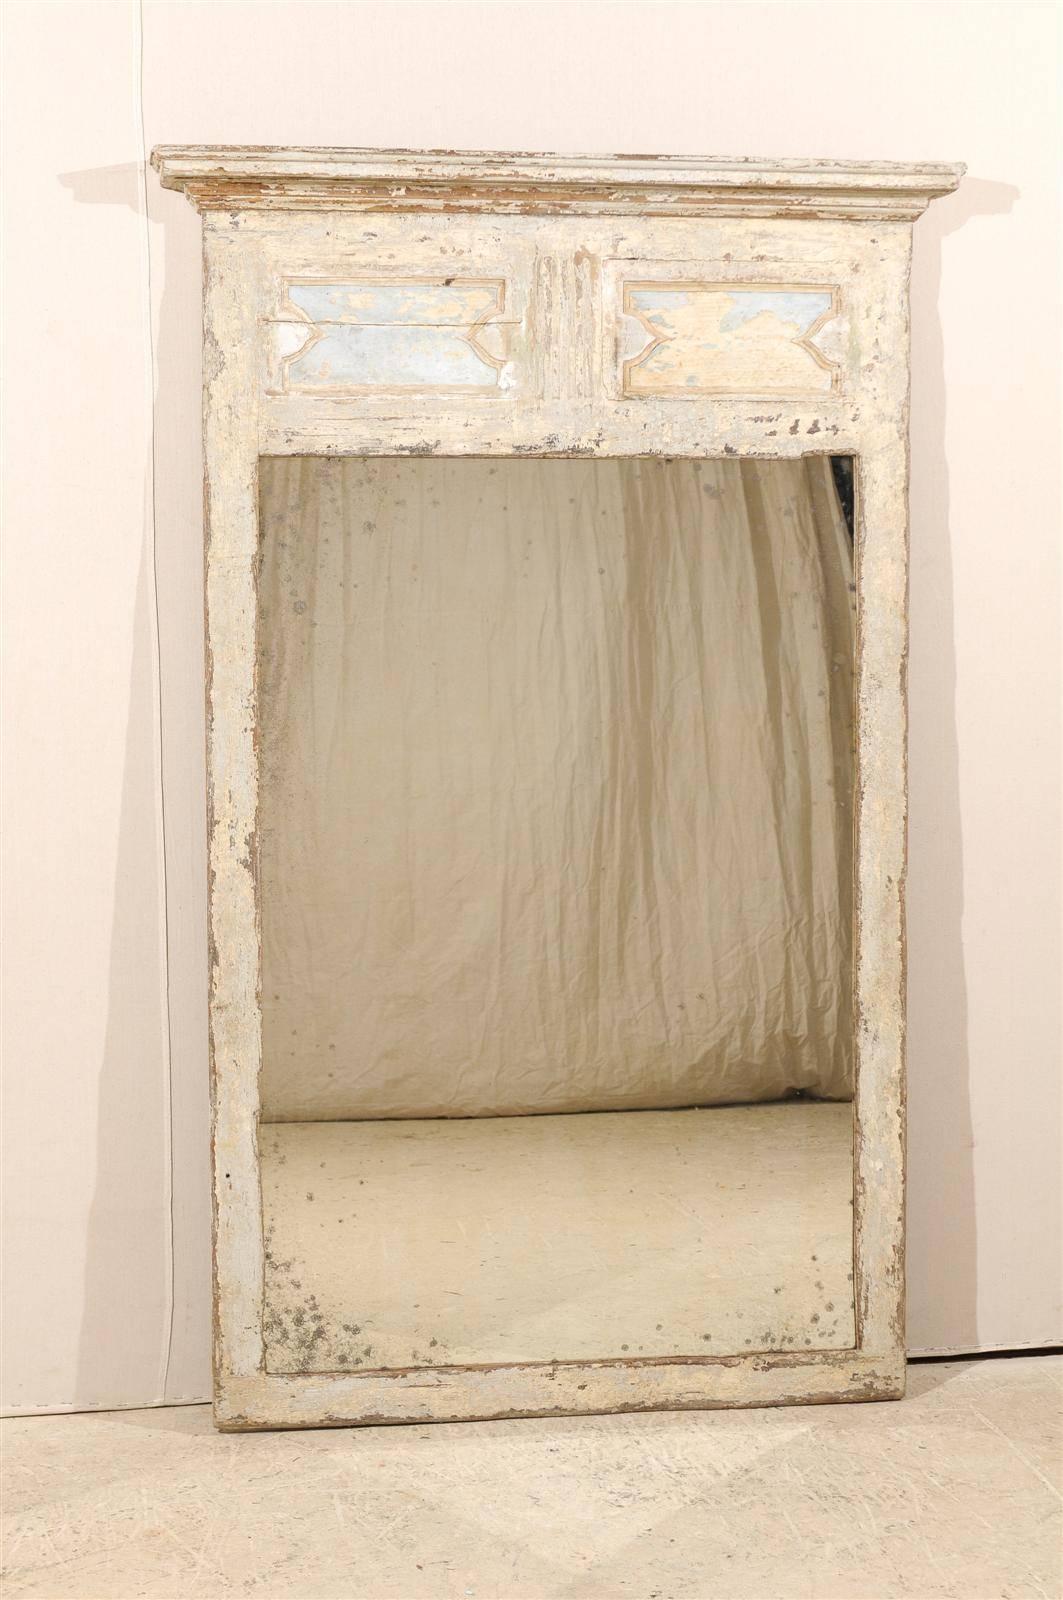 A large 19th century Spanish Trumeau mirror. This cream color Spanish painted and carved wood Trumeau mirror features two very faint blue motifs outlined with the slightest red tone sitting under the cornice. The glass is old and has antiquing